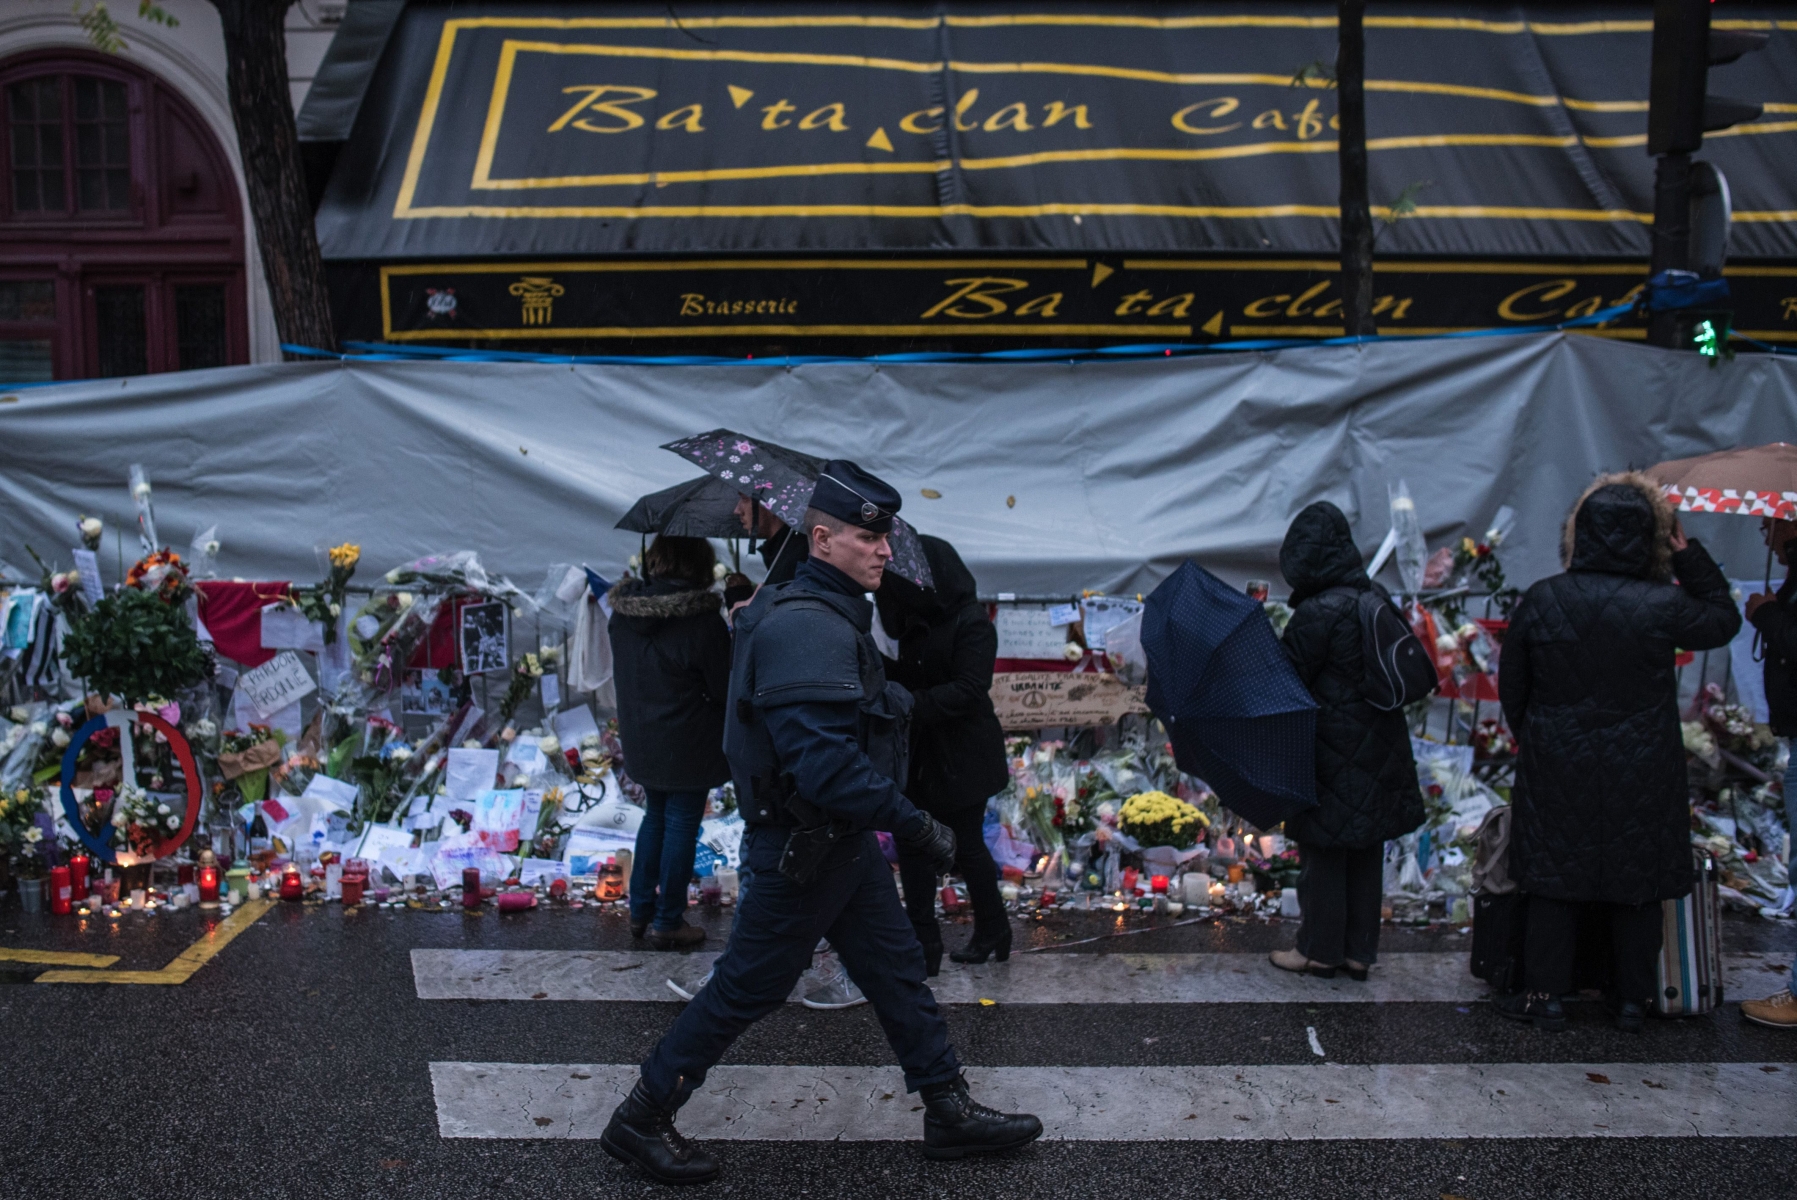 A policeman walks as people pay respects to victims of the Paris attacks in front of the Bataclan concert hall, Wednesday, Nov. 25, 2015, in Paris. Authorities in France and Belgium have issued public appeals for help in tracking down two men believed directly linked to the Paris attacks that killed 130 people and wounded hundreds in shootings and suicide bombings in the French capital. (AP Photo/Kamil Zihnioglu) FRANKREICH TERRORISMUS ANSCHLAEGE PARIS